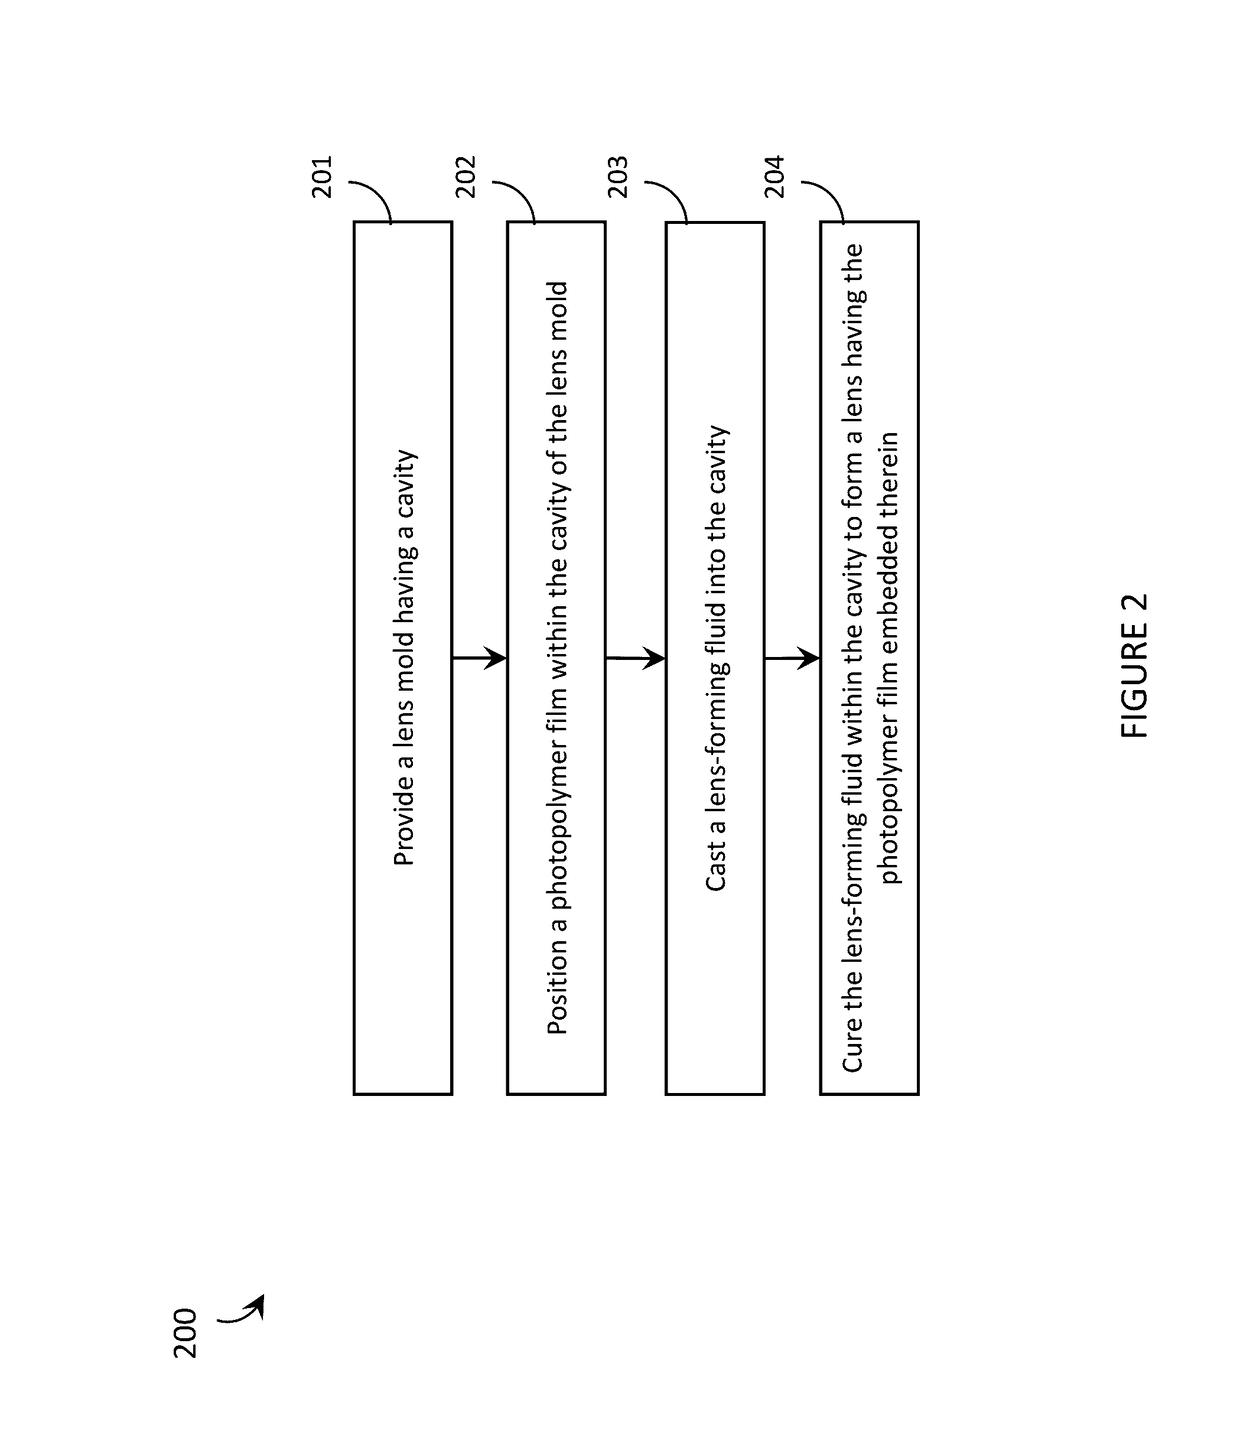 Systems, articles, and methods for integrating holographic optical elements with eyeglass lenses